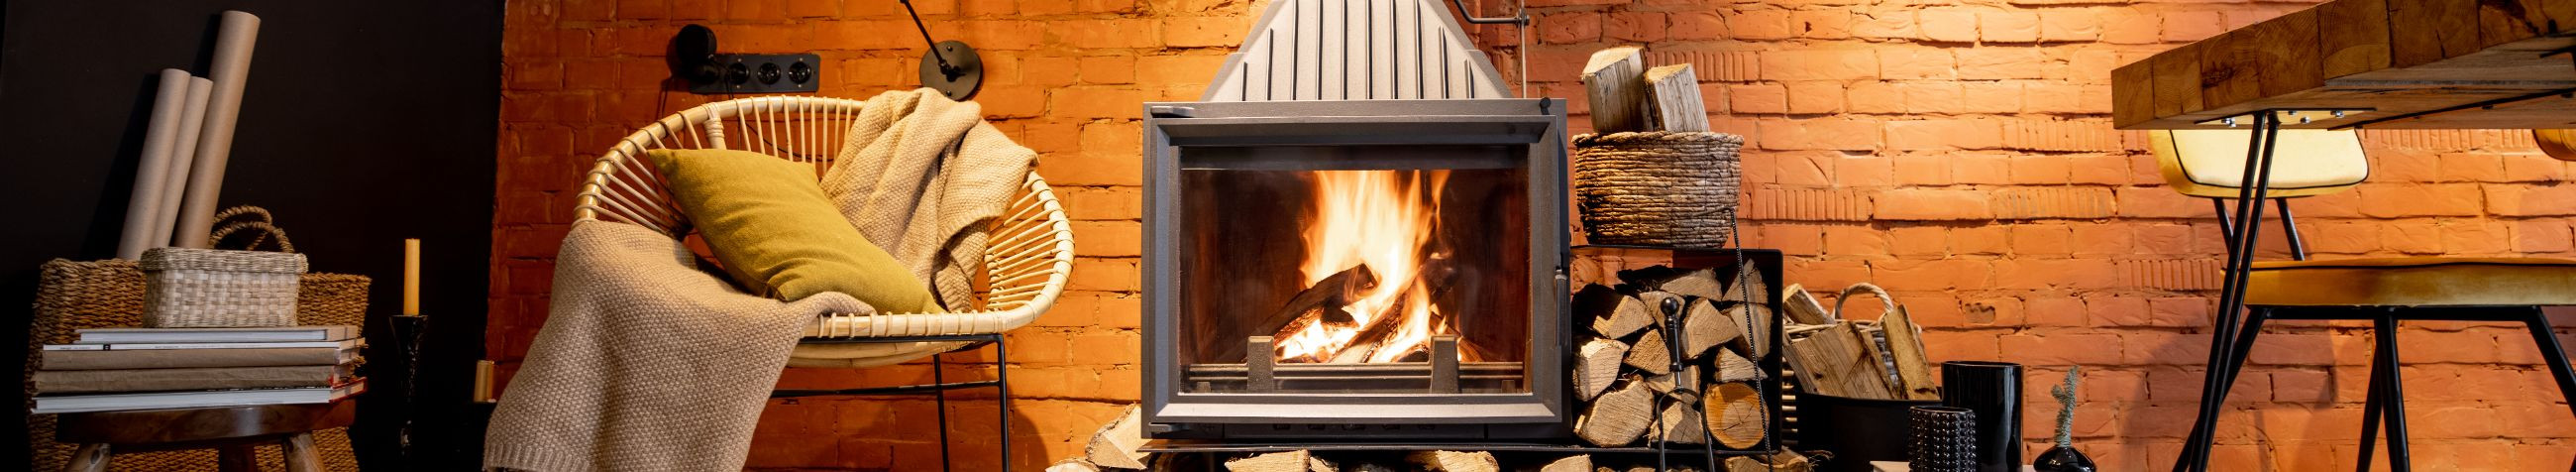 Stoves, fireplace repair, renovation, chimney sweep, cleaning of flues, other repair works, masonry work, sweeping chimneys, sweeping chimney, finishing work in the room